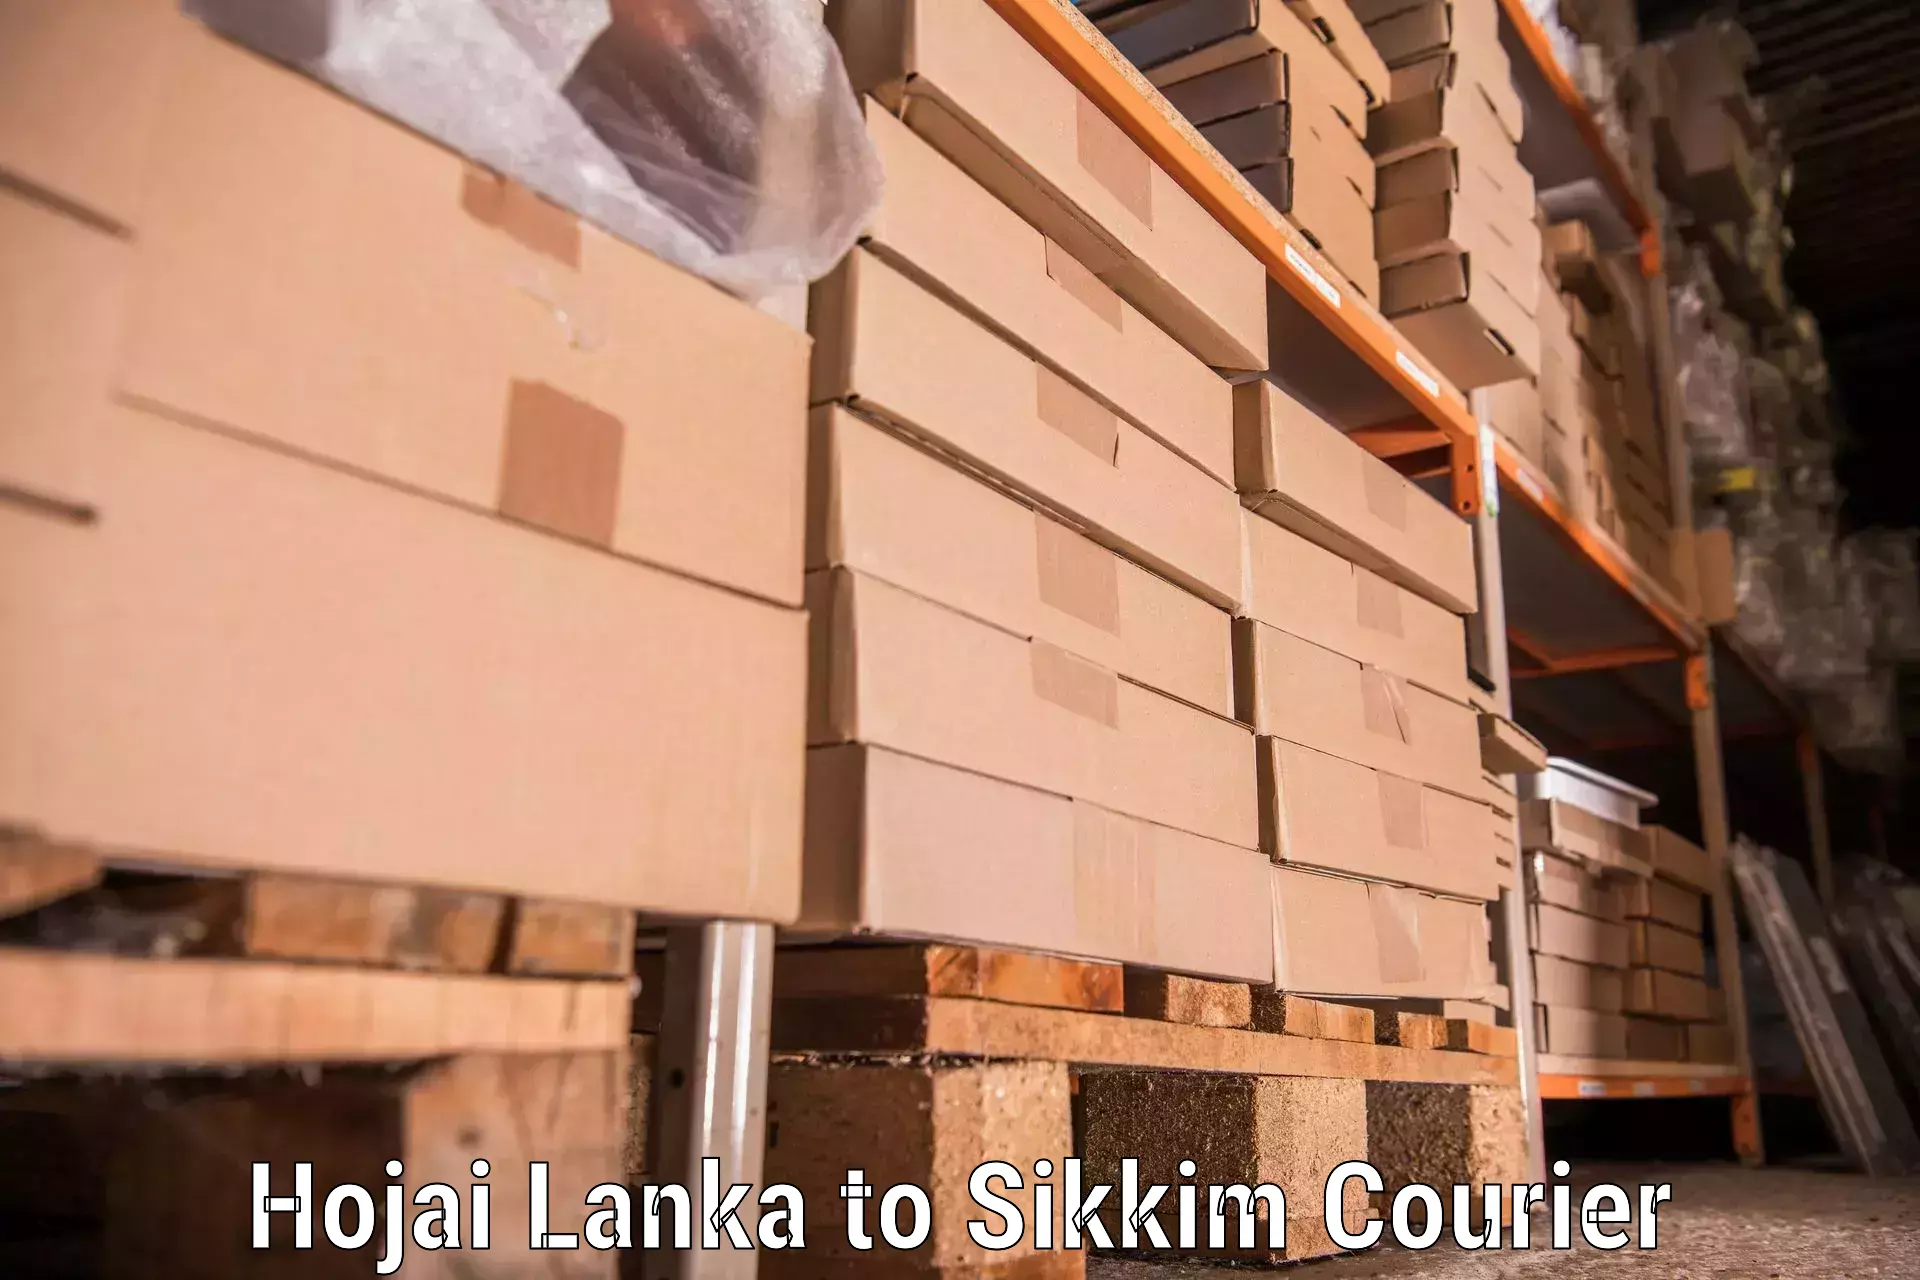 Quality relocation services Hojai Lanka to North Sikkim